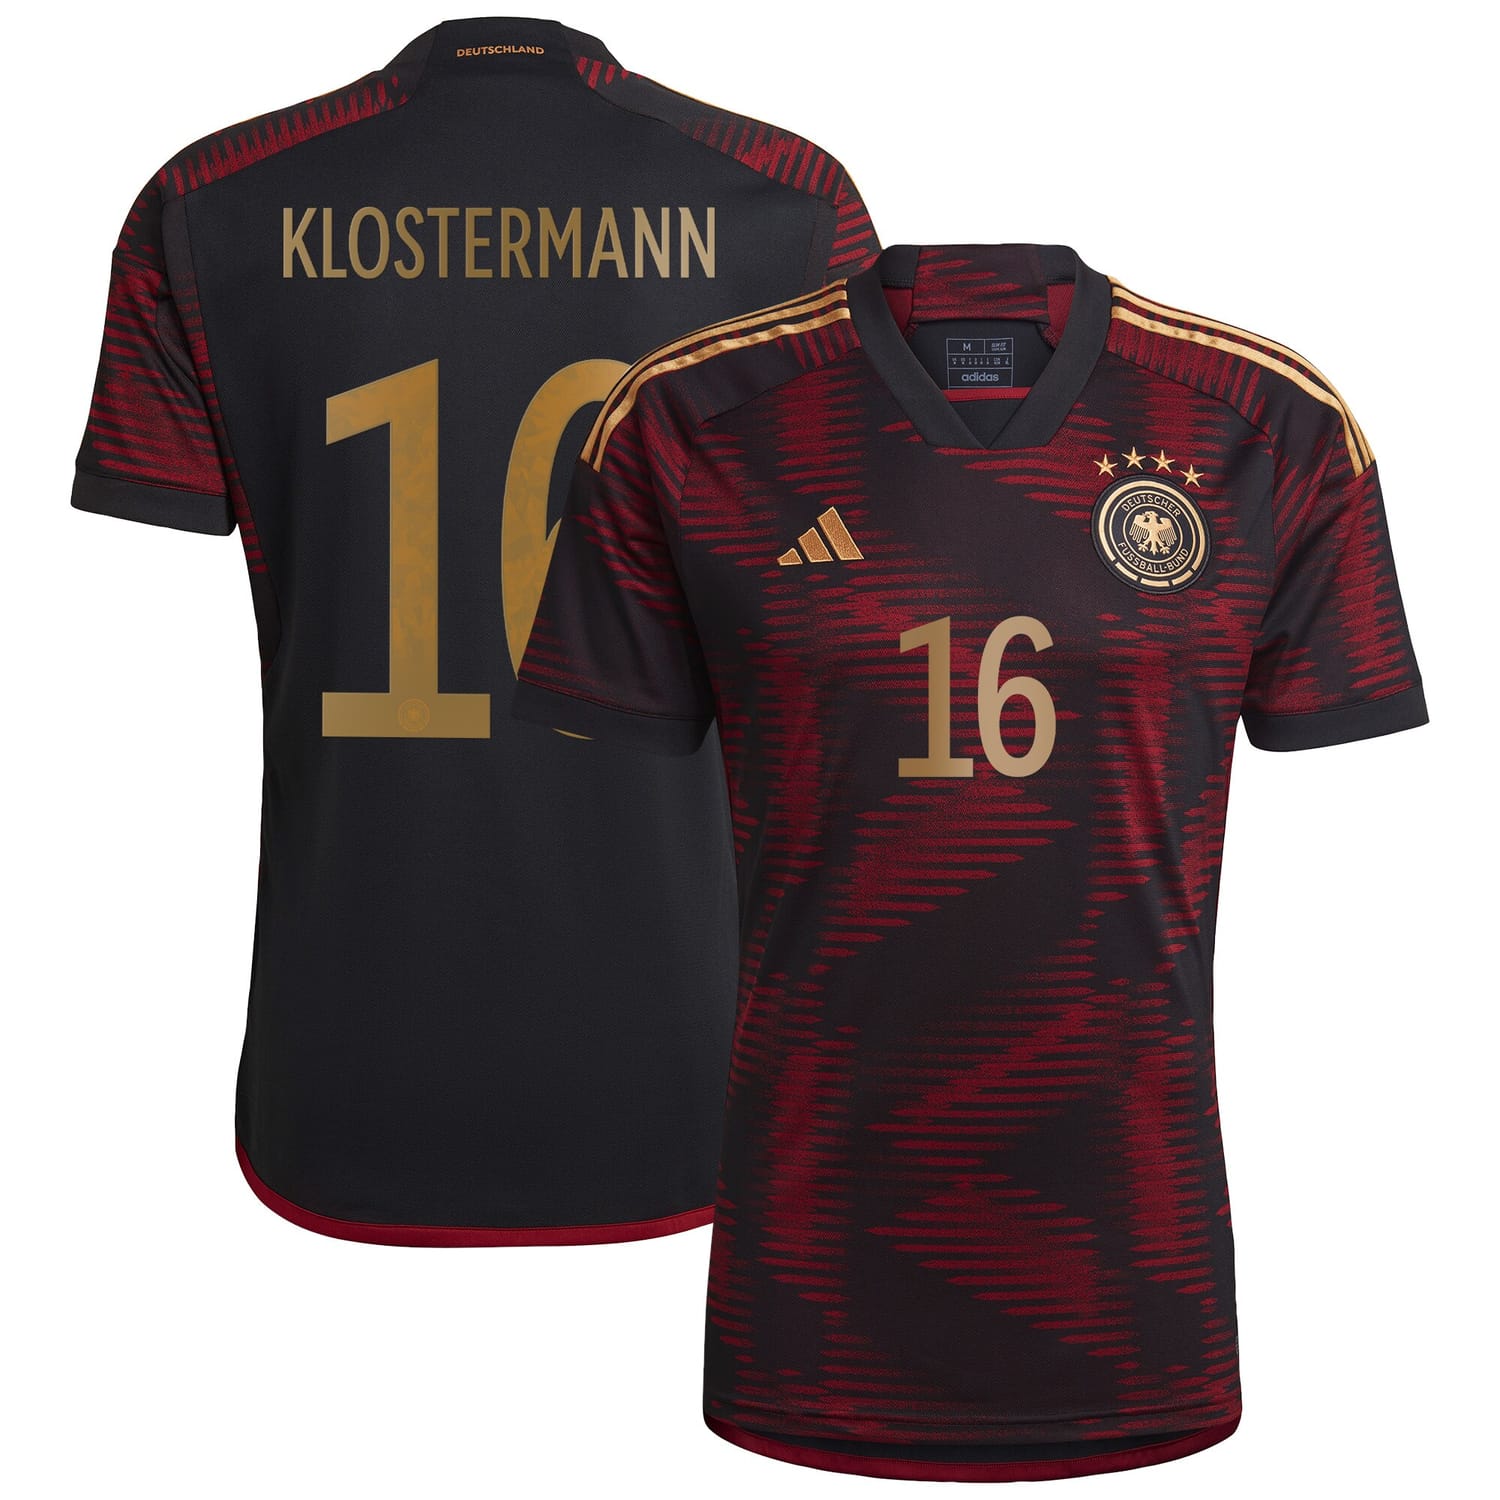 Germany National Team Away Jersey Shirt player Lukas Klostermann 16 printing for Men